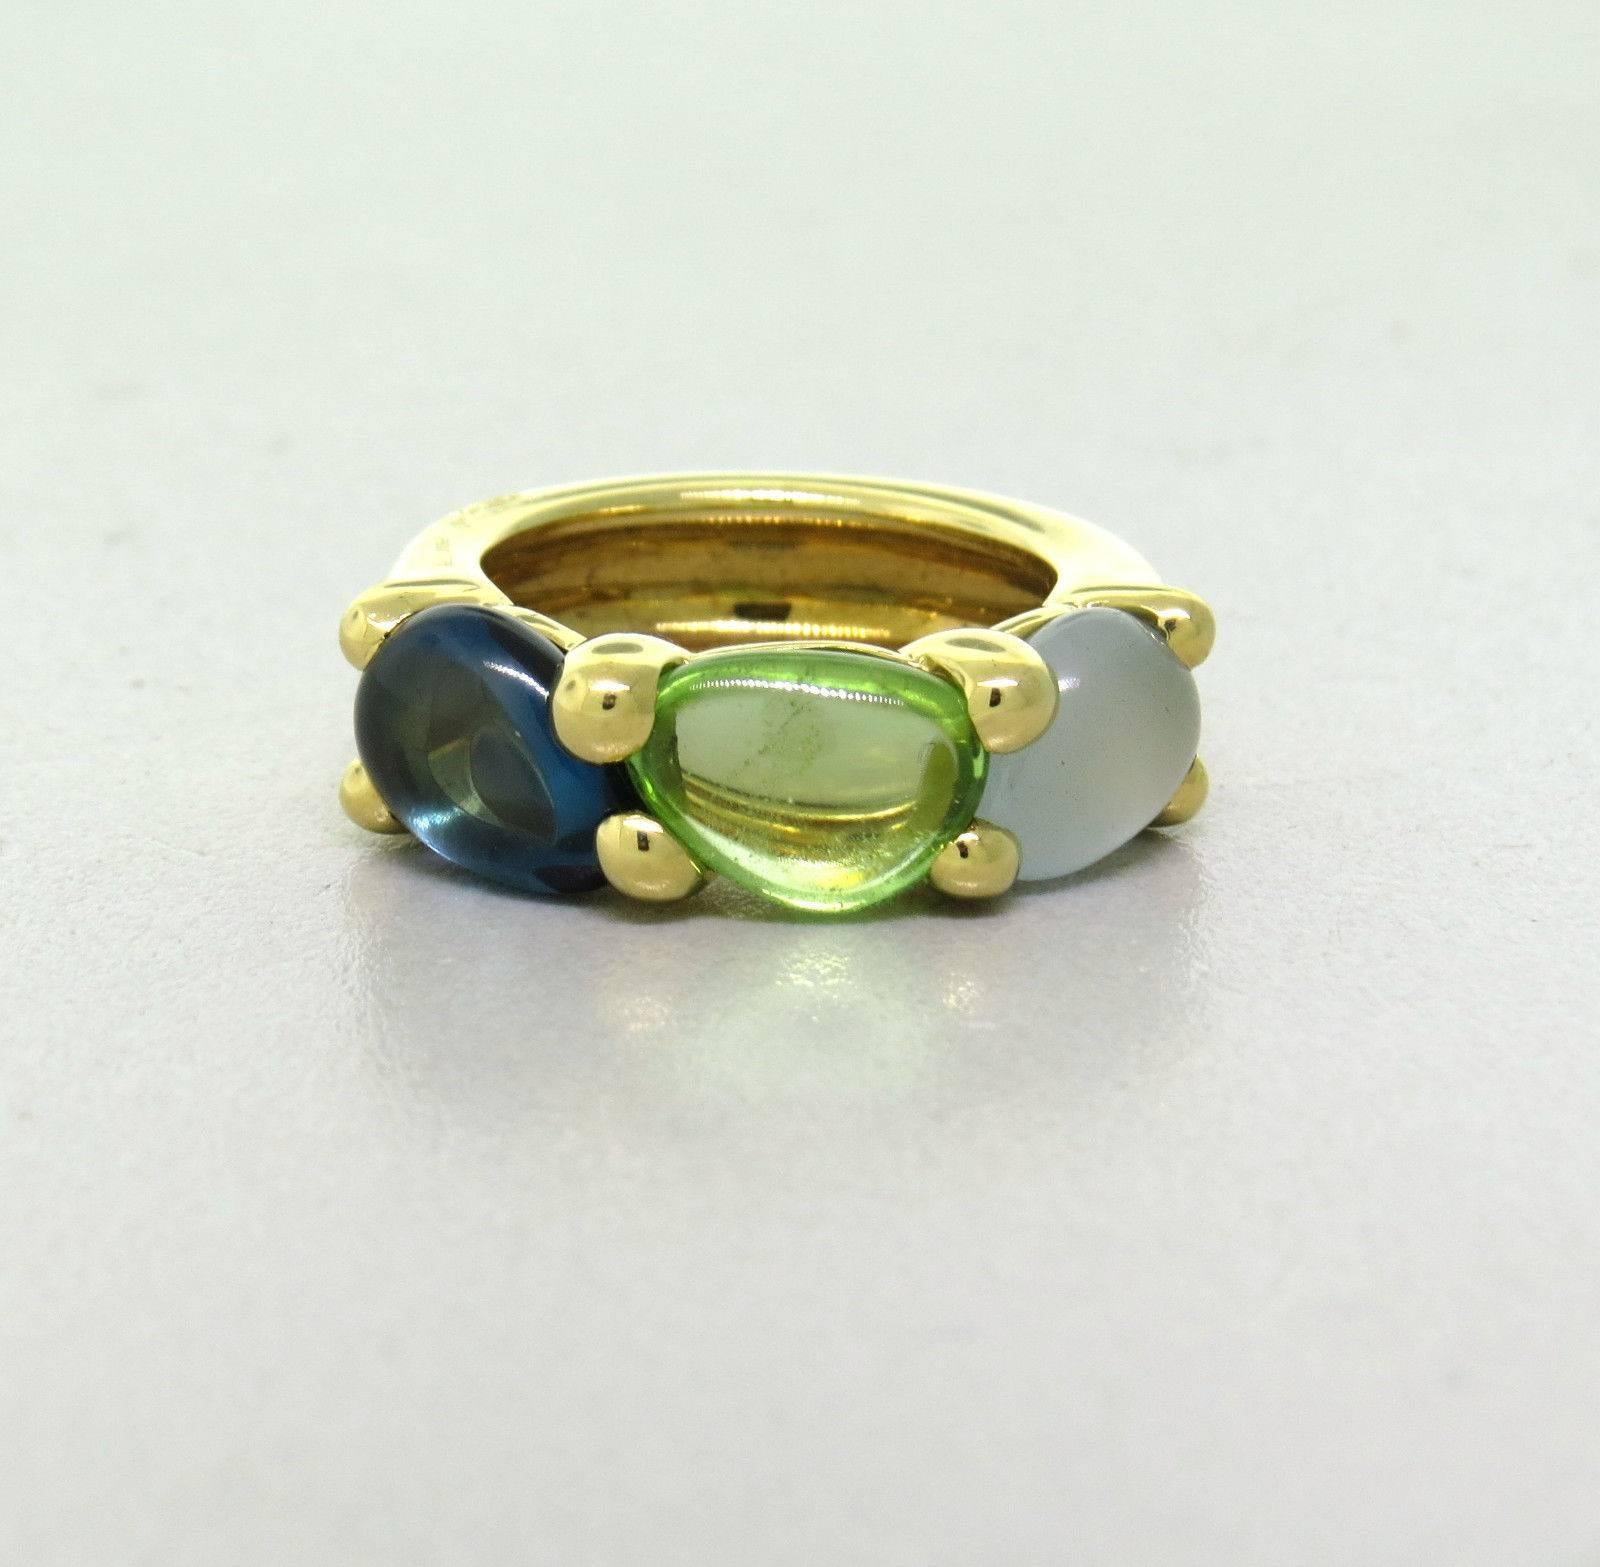 An 18k yellow gold ring, crafted by Pomellato for Sassi collection, decorated with blue topaz, peridot and aquamarine gemstones. Ring size  6, ring is 8mm wide.  Weight - 13 grams 